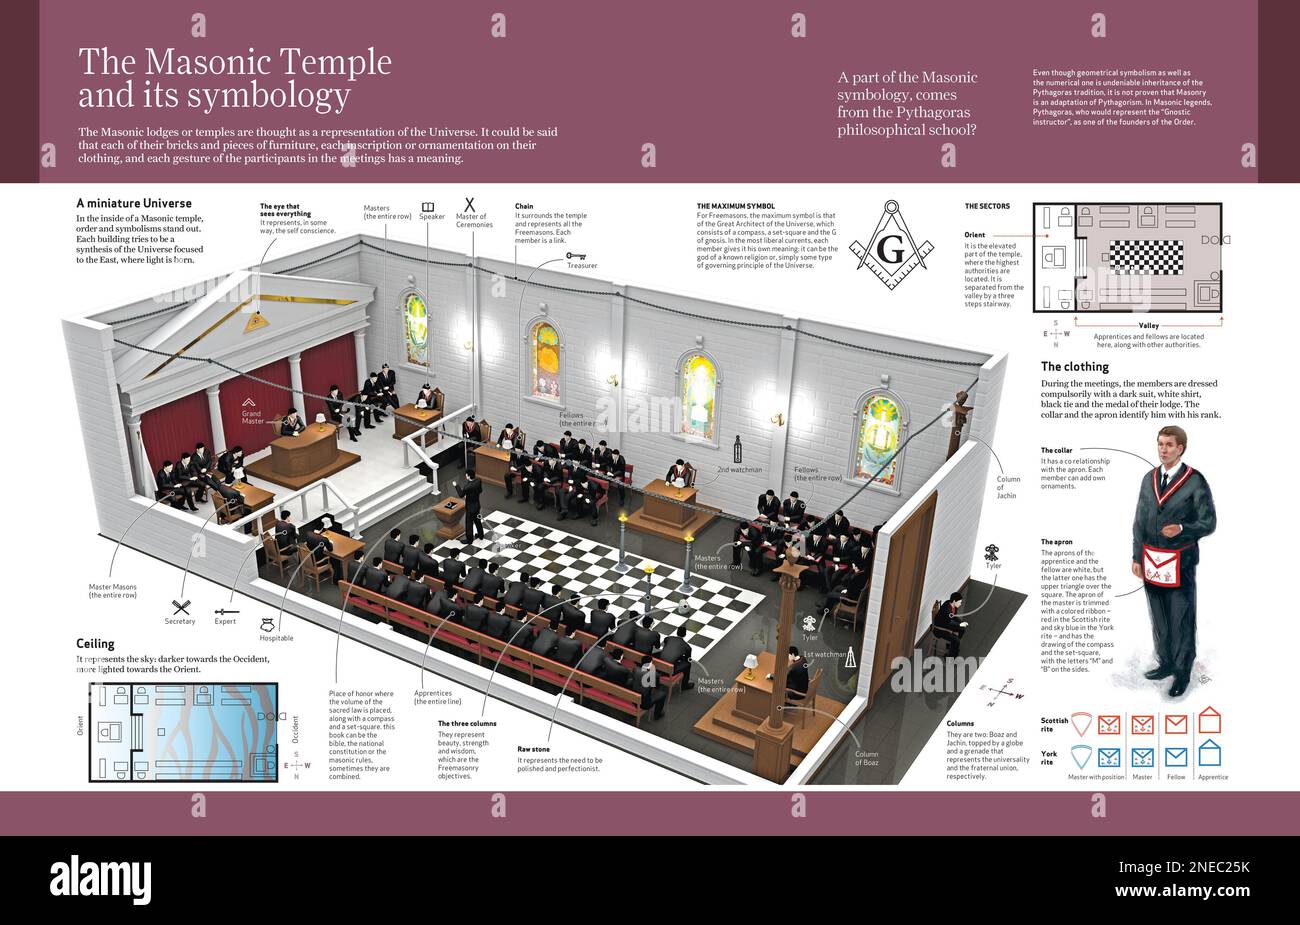 Infographic about the Masonic Temple, its symbology, ceremonial rites and participants in the meetings. Masonry appeared in Europe between the end of the 17th century and beginning of 18th. [Adobe InDesign (.indd); 4960x3188]. Stock Photo